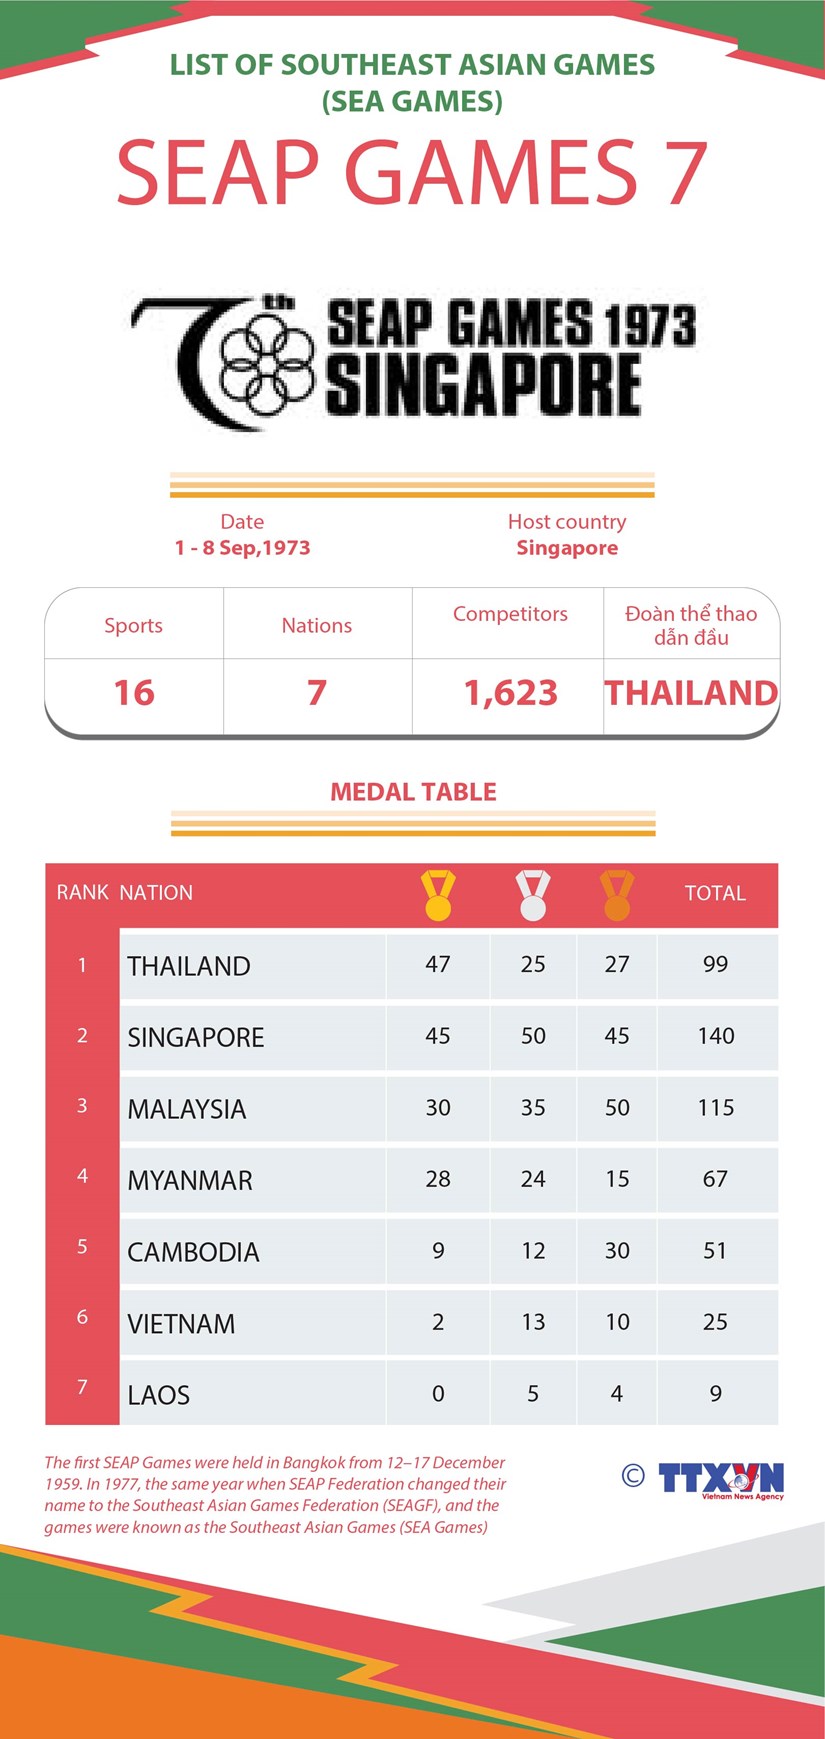 List of Southeast Asian Games: SEAP GAMES 7 hinh anh 1